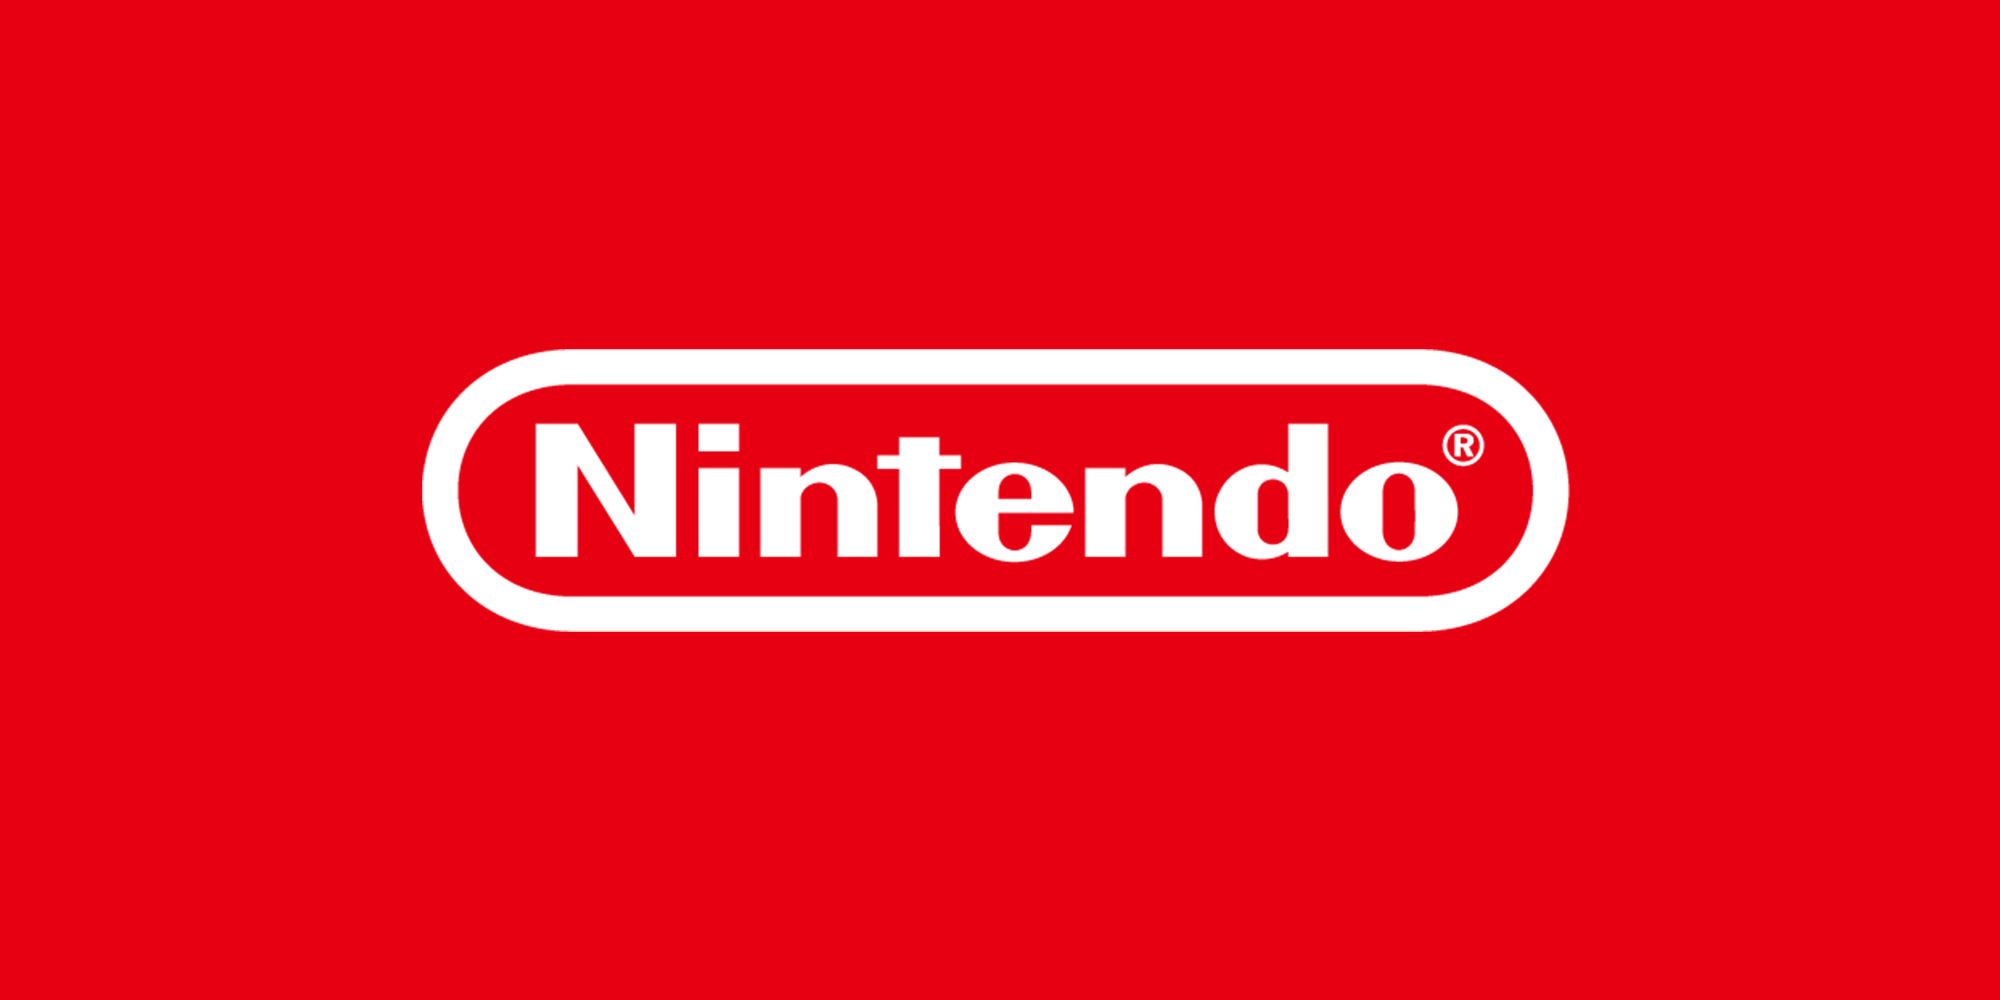 Nintendo Announces Delays In Repairing And Returning Hardware Due To Increase Of Requests